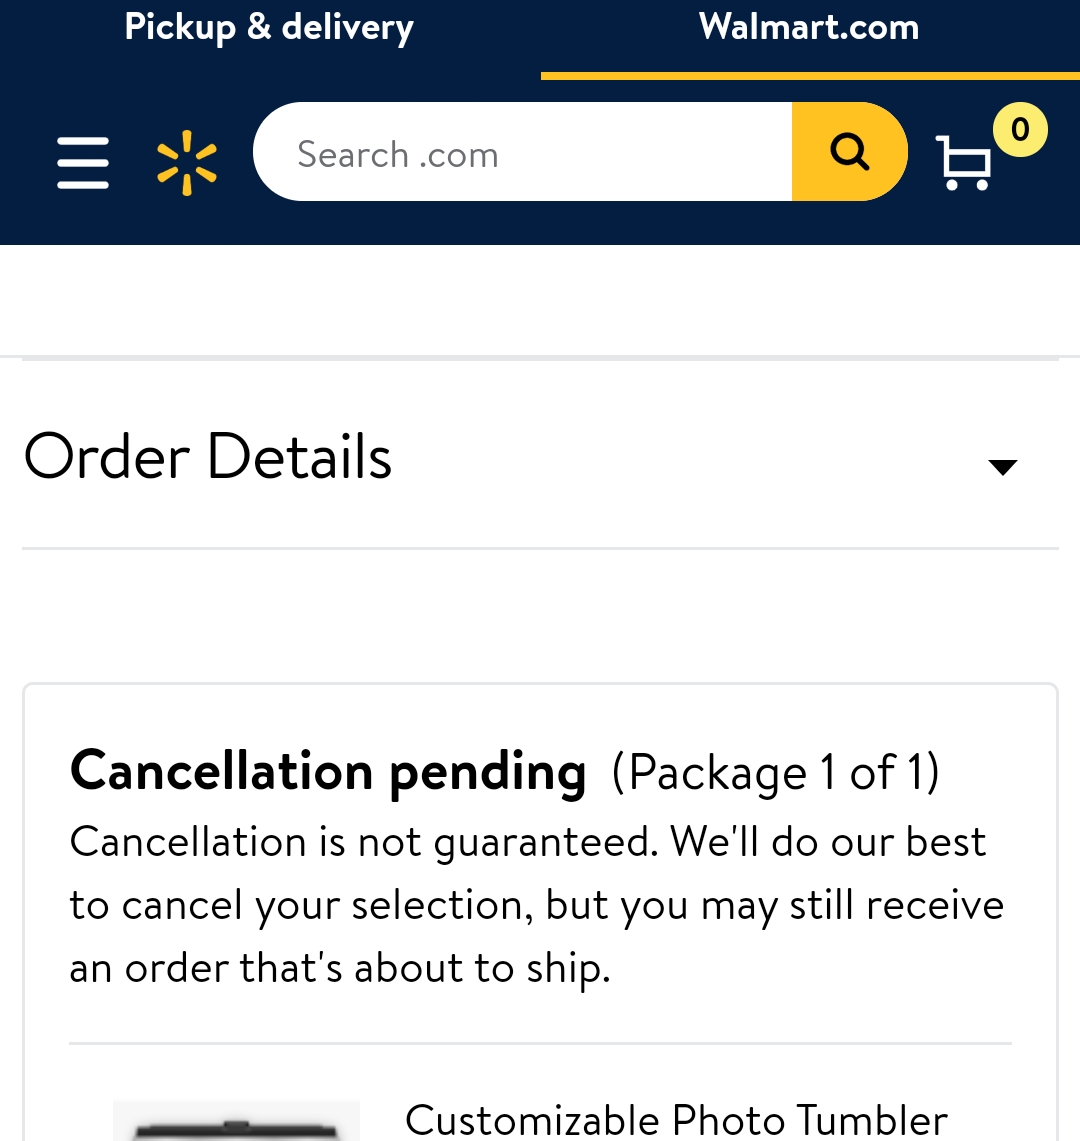 Why Is My Walmart Order Taking So Long To Process? (2022)